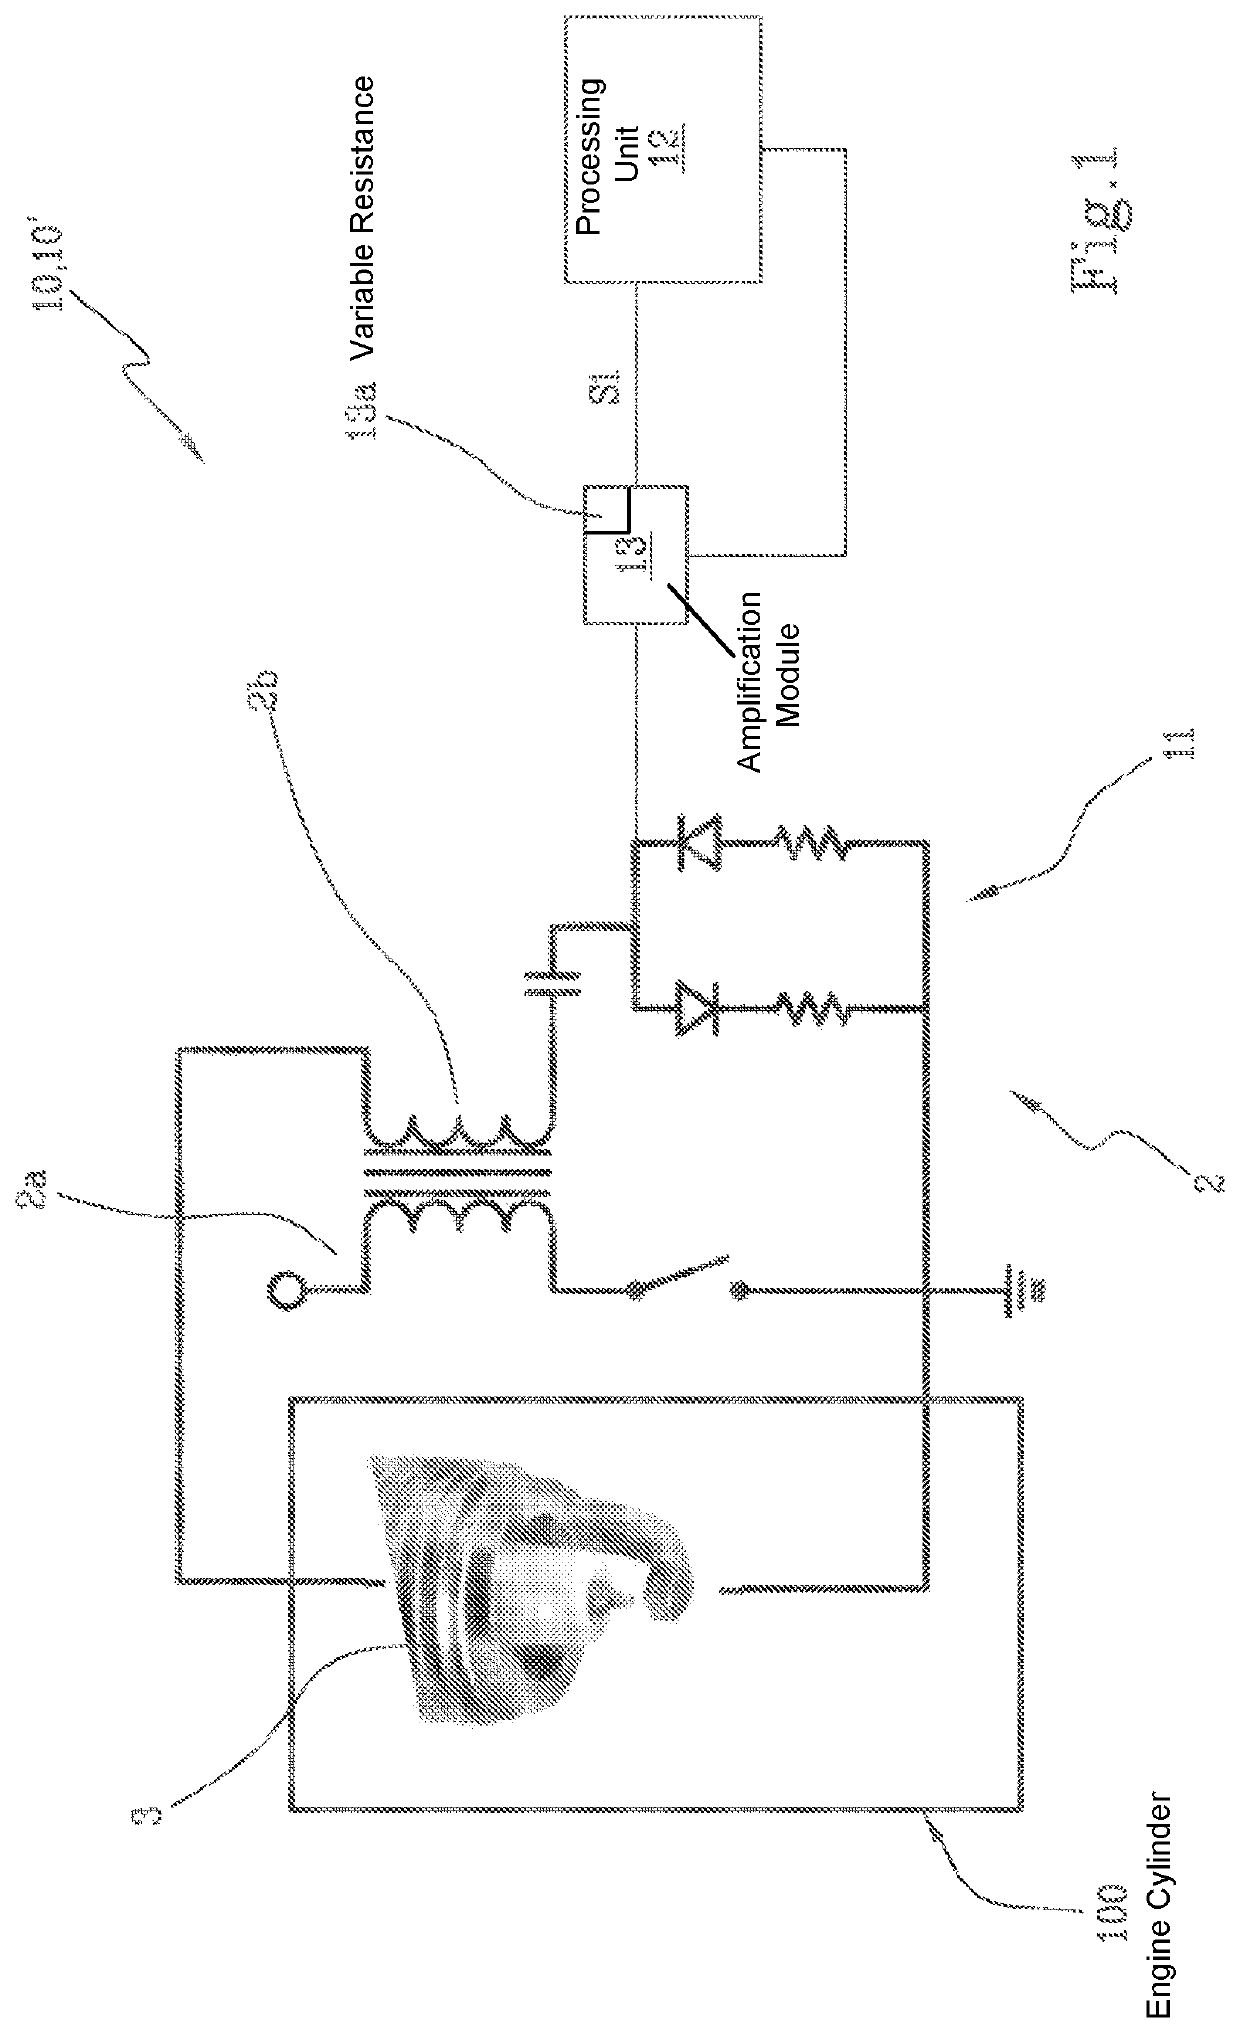 Method and system for monitoring an engine cylinder in an internal combustion engine, a method and device for controlling combustion in said engine cylinder and an ignition apparatus for an internal combustion engine